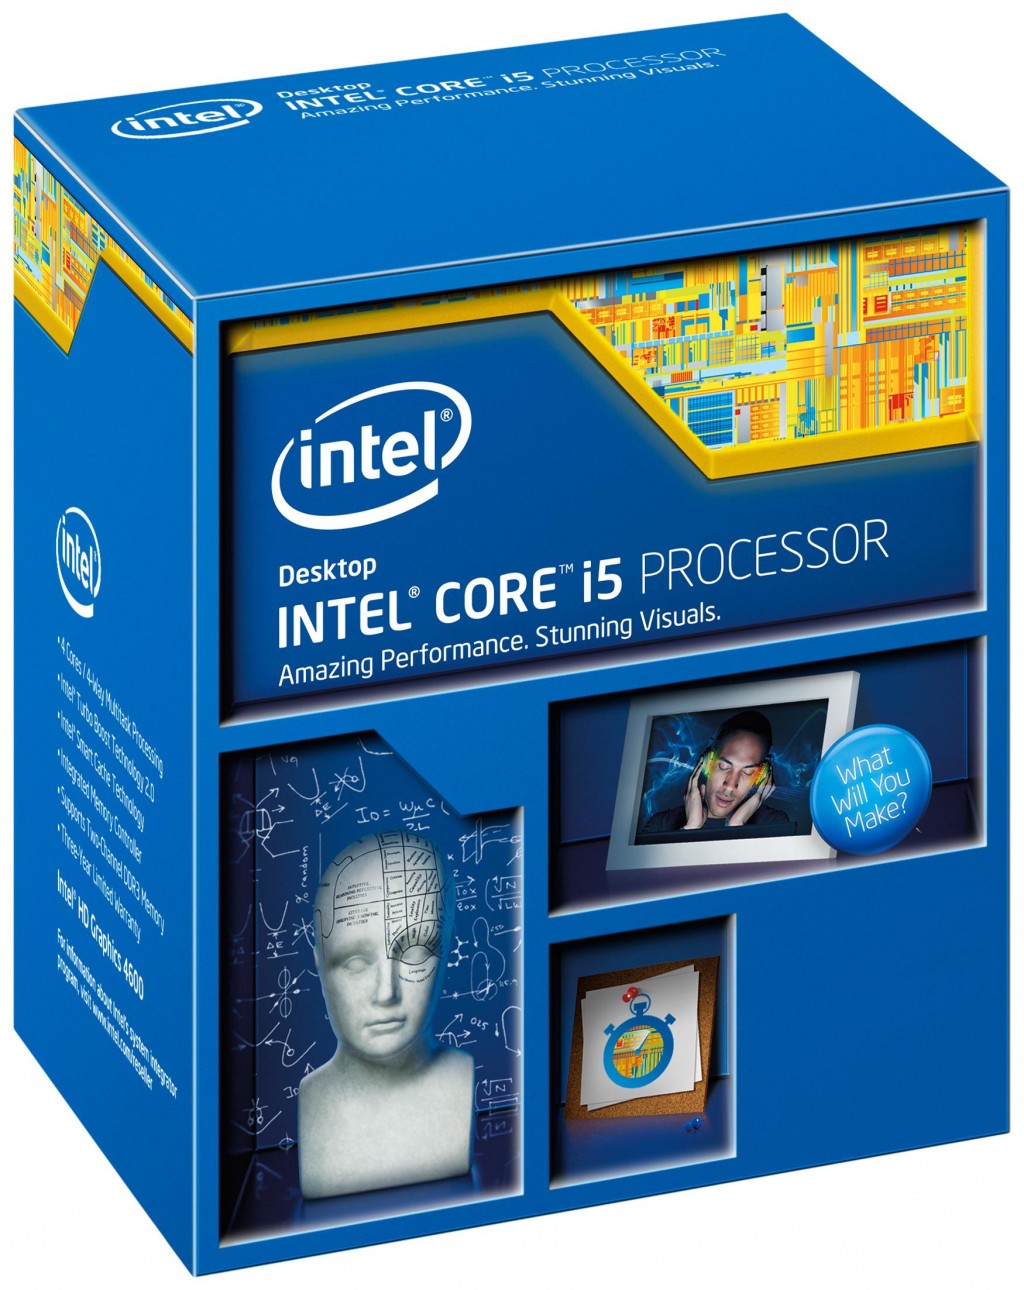 Intel i5-4460, 3.2 GHz, LGA1150, Processor threads 4, Packing Retail, Cooler included, Component for PC